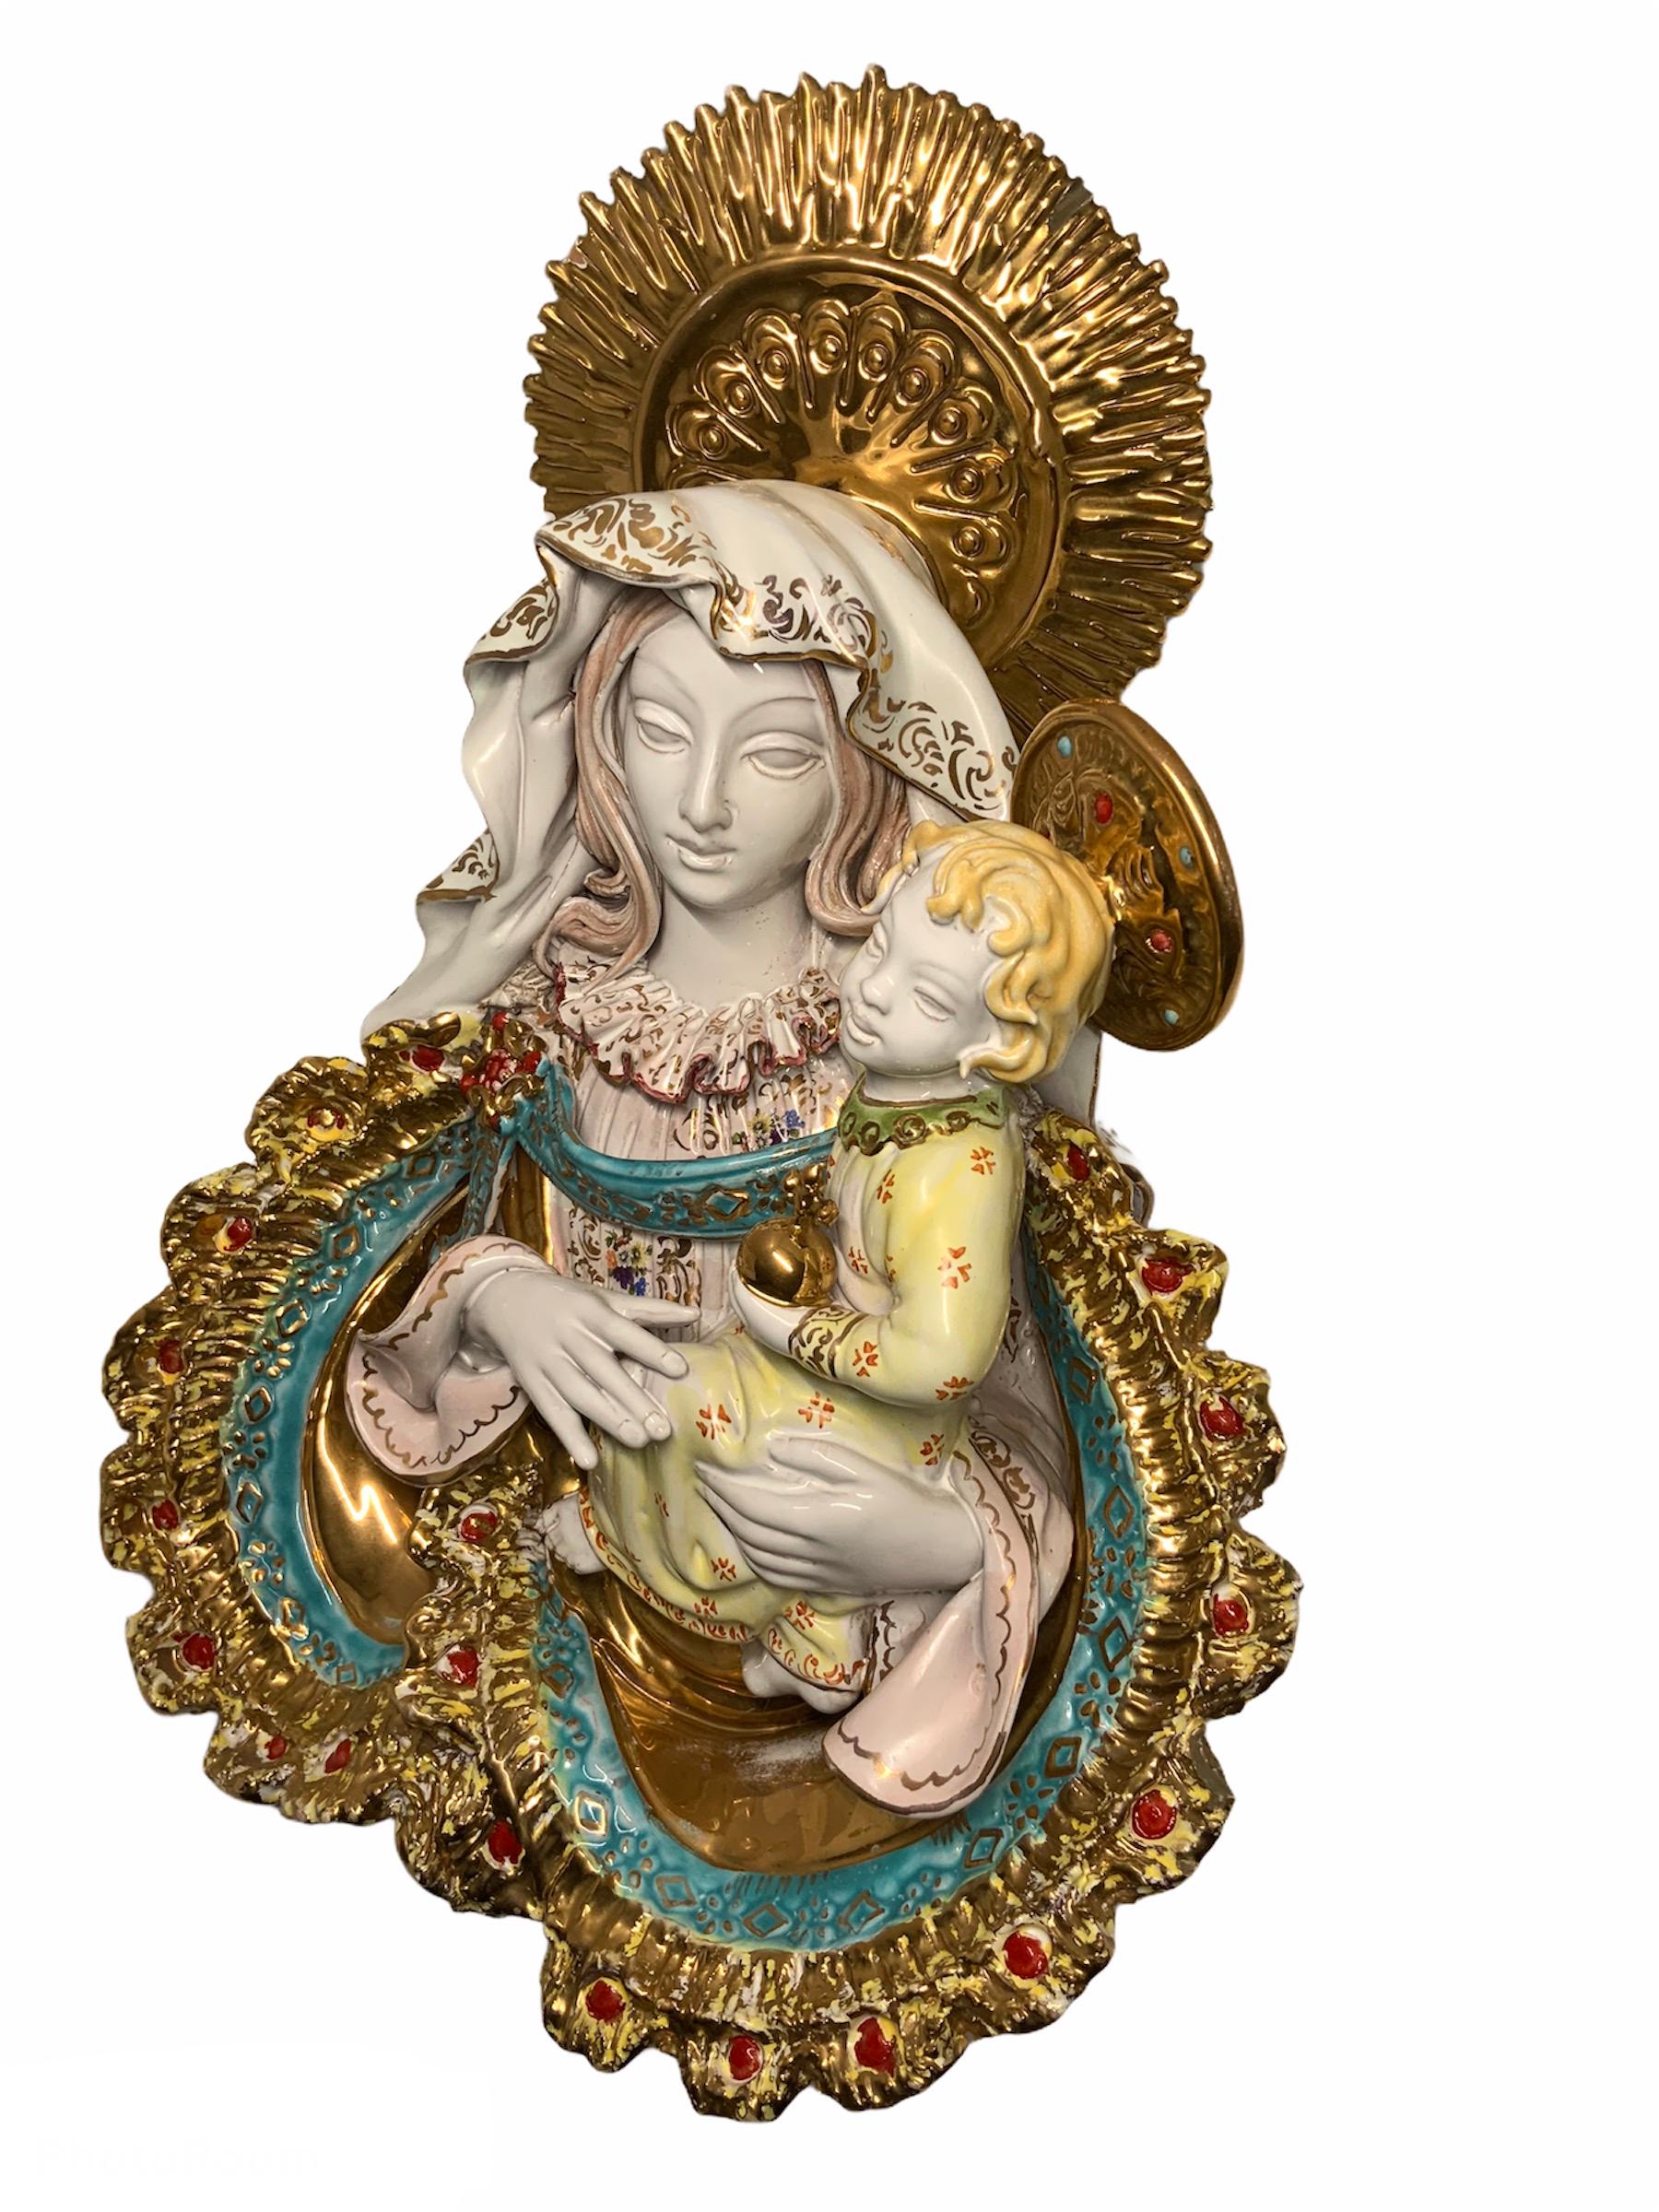 This an Italian E. Pattarino large Madonna and Baby Jesus terra-cotta wall sculpture hand painted in vibrant colors. Both of them adorned with large golden colors crowns. Her pink outfit with ruffles collar is adorned with flowers. Also a gilt